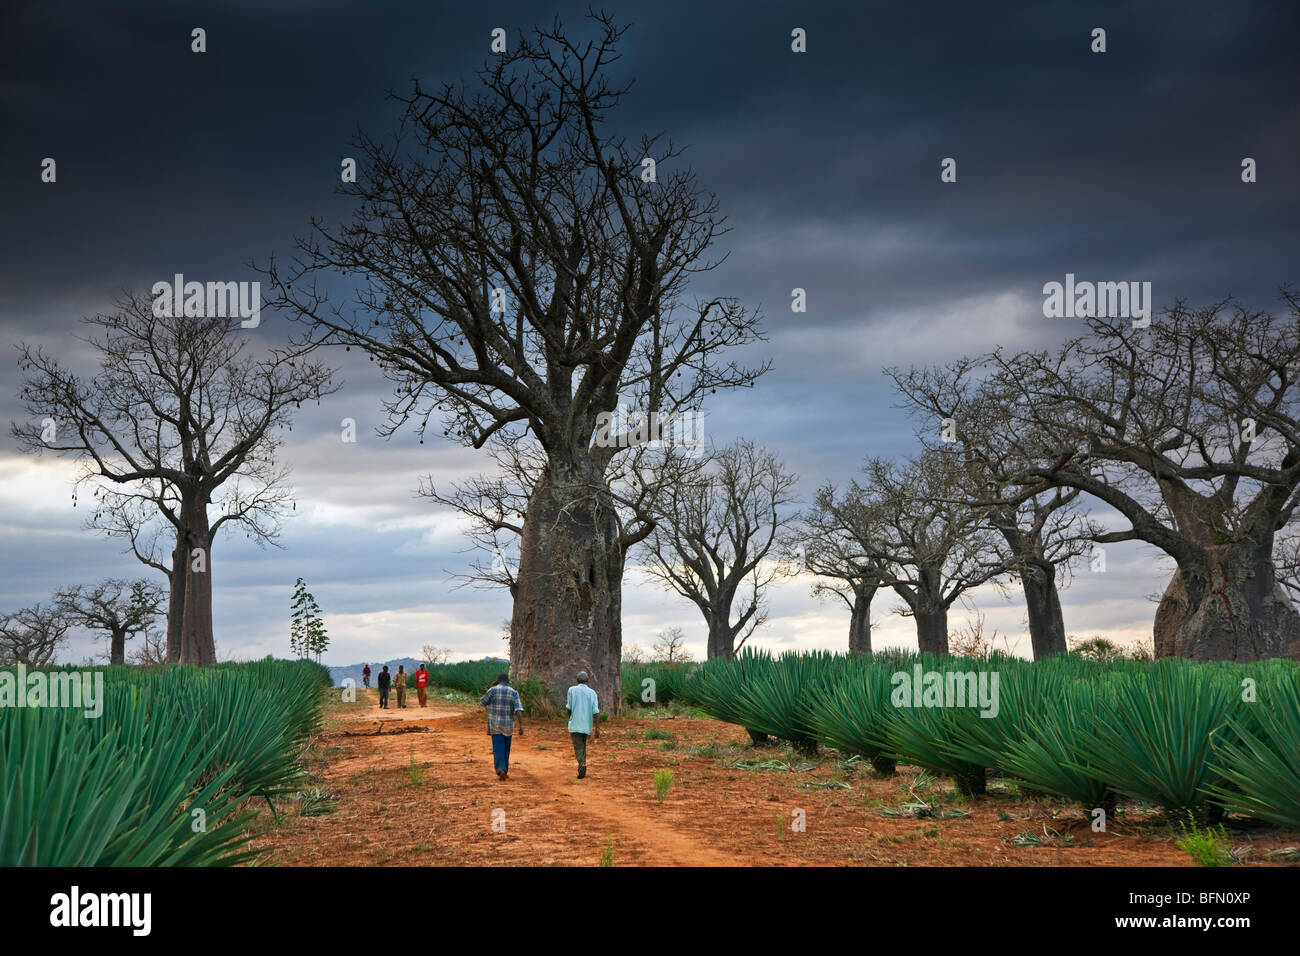 Kenya, Kibwezi. At the end of a day, workers at a sisal estate head for home along a path fringed by giant baobab trees. Stock Photo